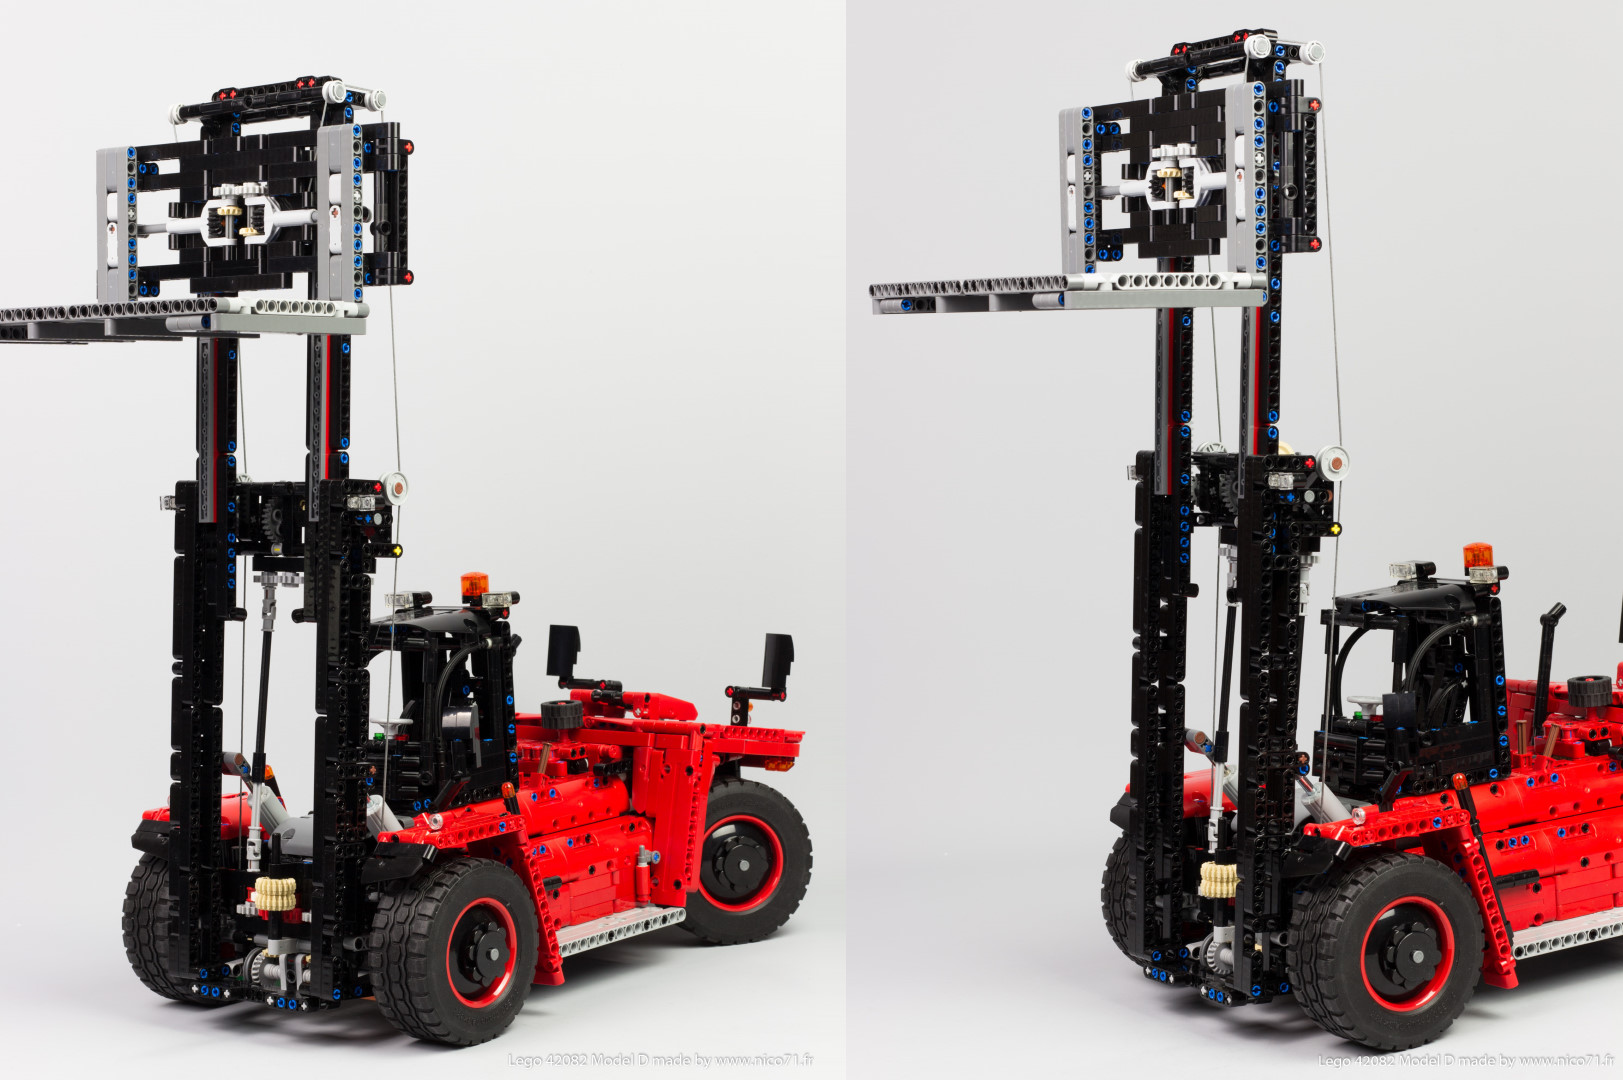 42082 D – Forklift Truck – Nico71's Technic Creations